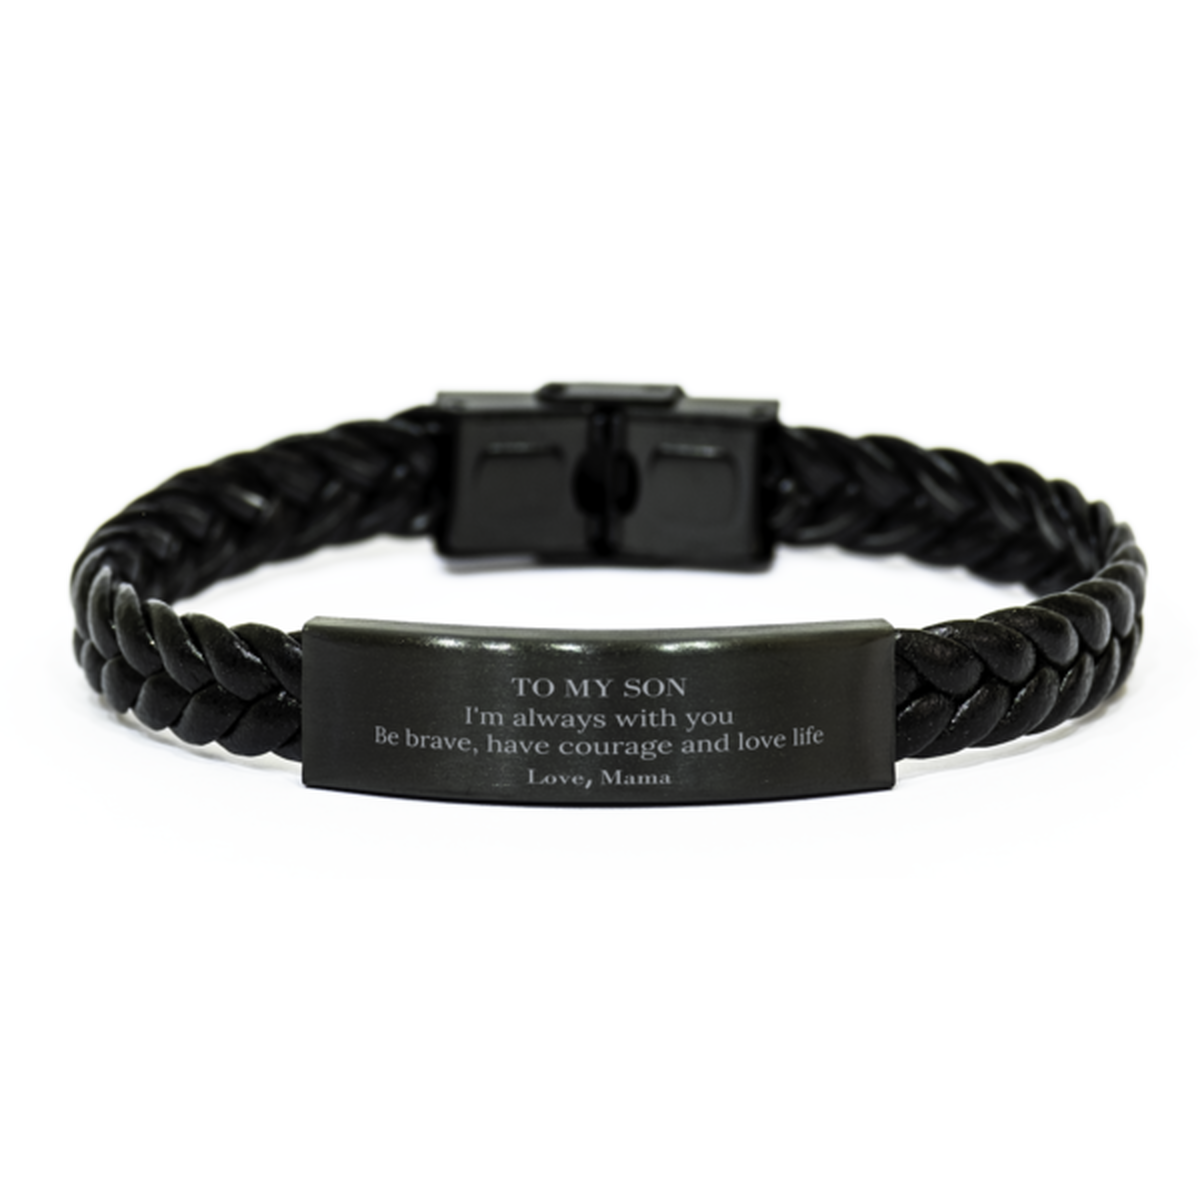 To My Son Gifts from Mama, Unique Braided Leather Bracelet Inspirational Christmas Birthday Graduation Gifts for Son I'm always with you. Be brave, have courage and love life. Love, Mama